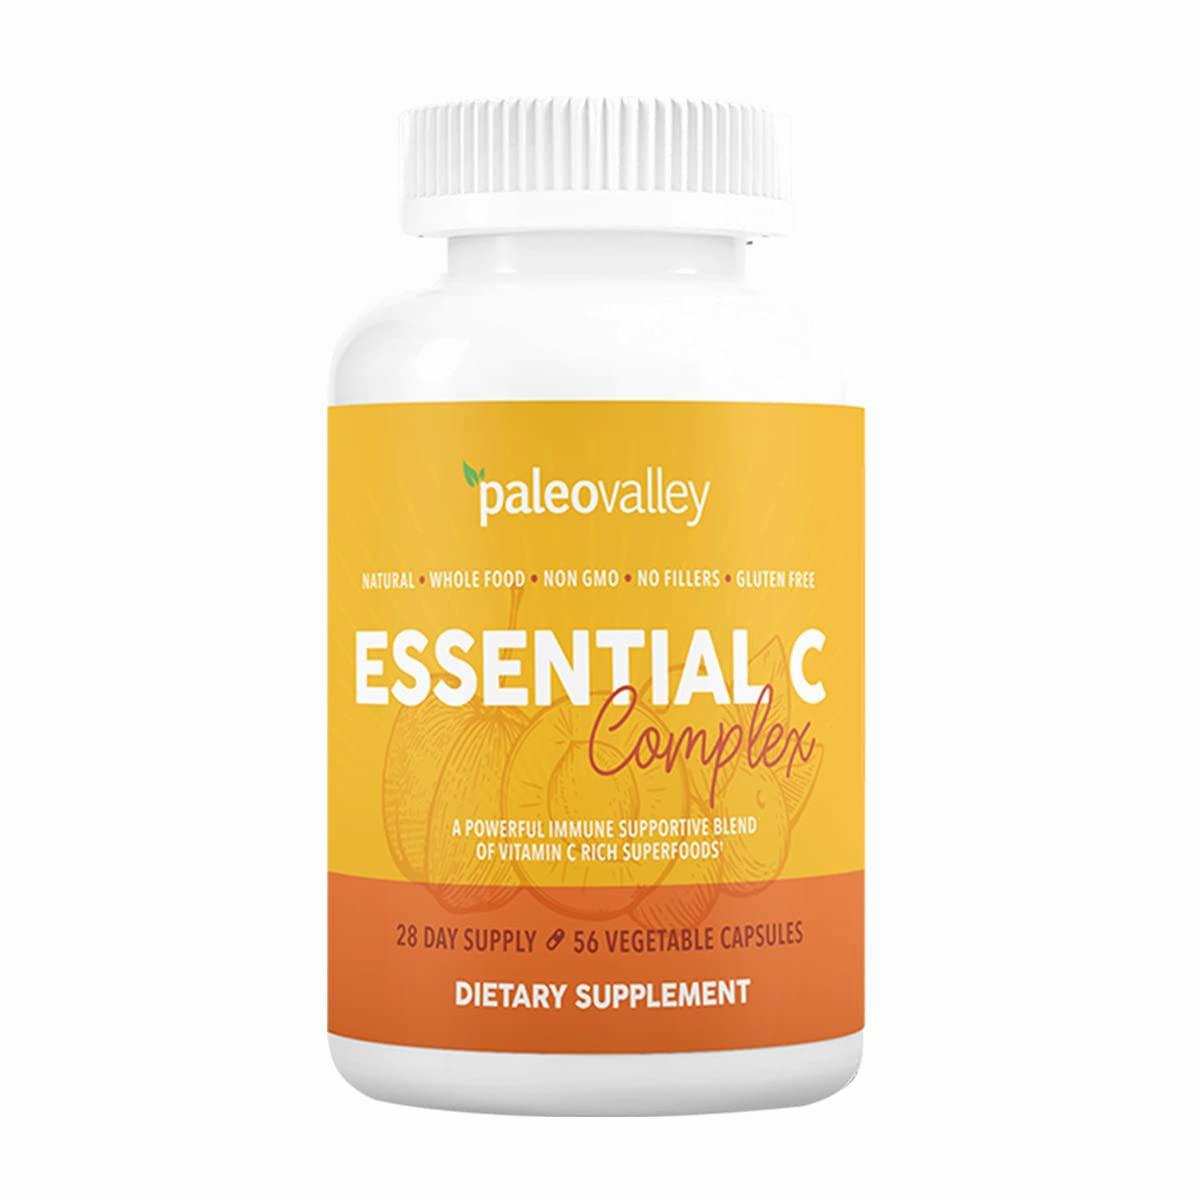 A bottle of Essential C Complex, a dietary supplement by Paleovalley.